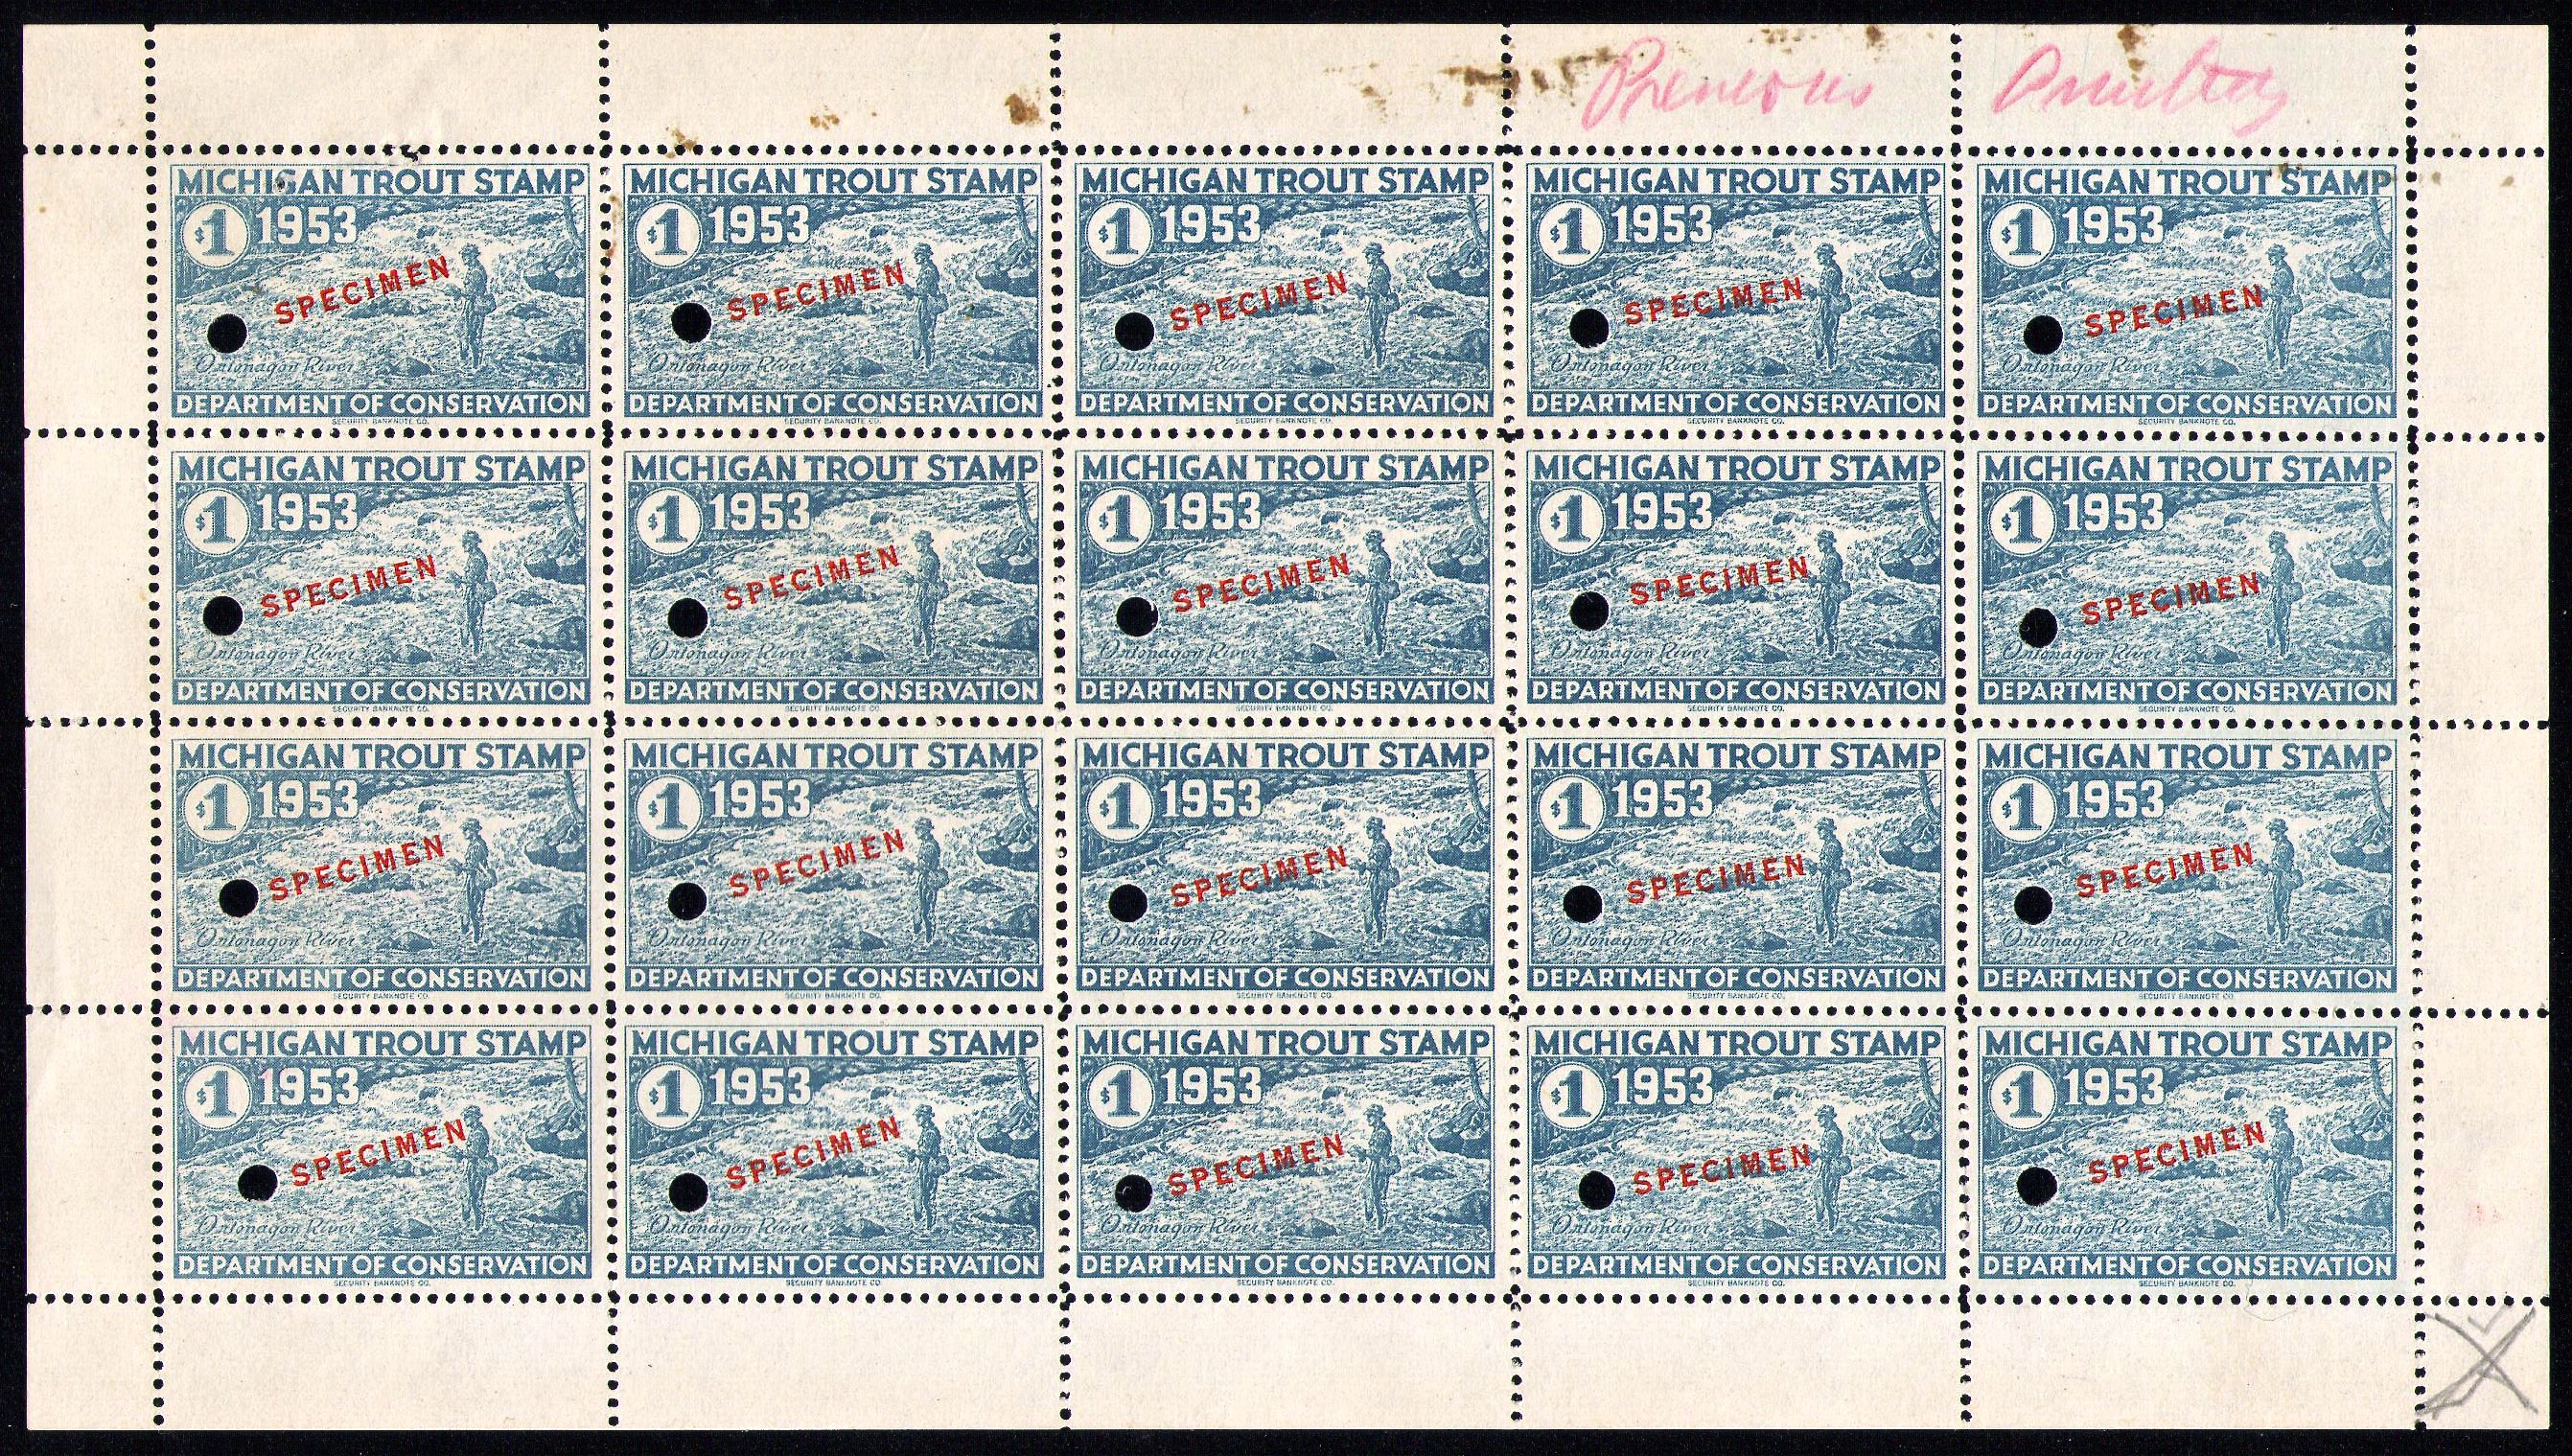 1953 Michigan Trout Specimen Sheet Marked "Previous Printing" - Likely Used As a Production Proof in 1954 